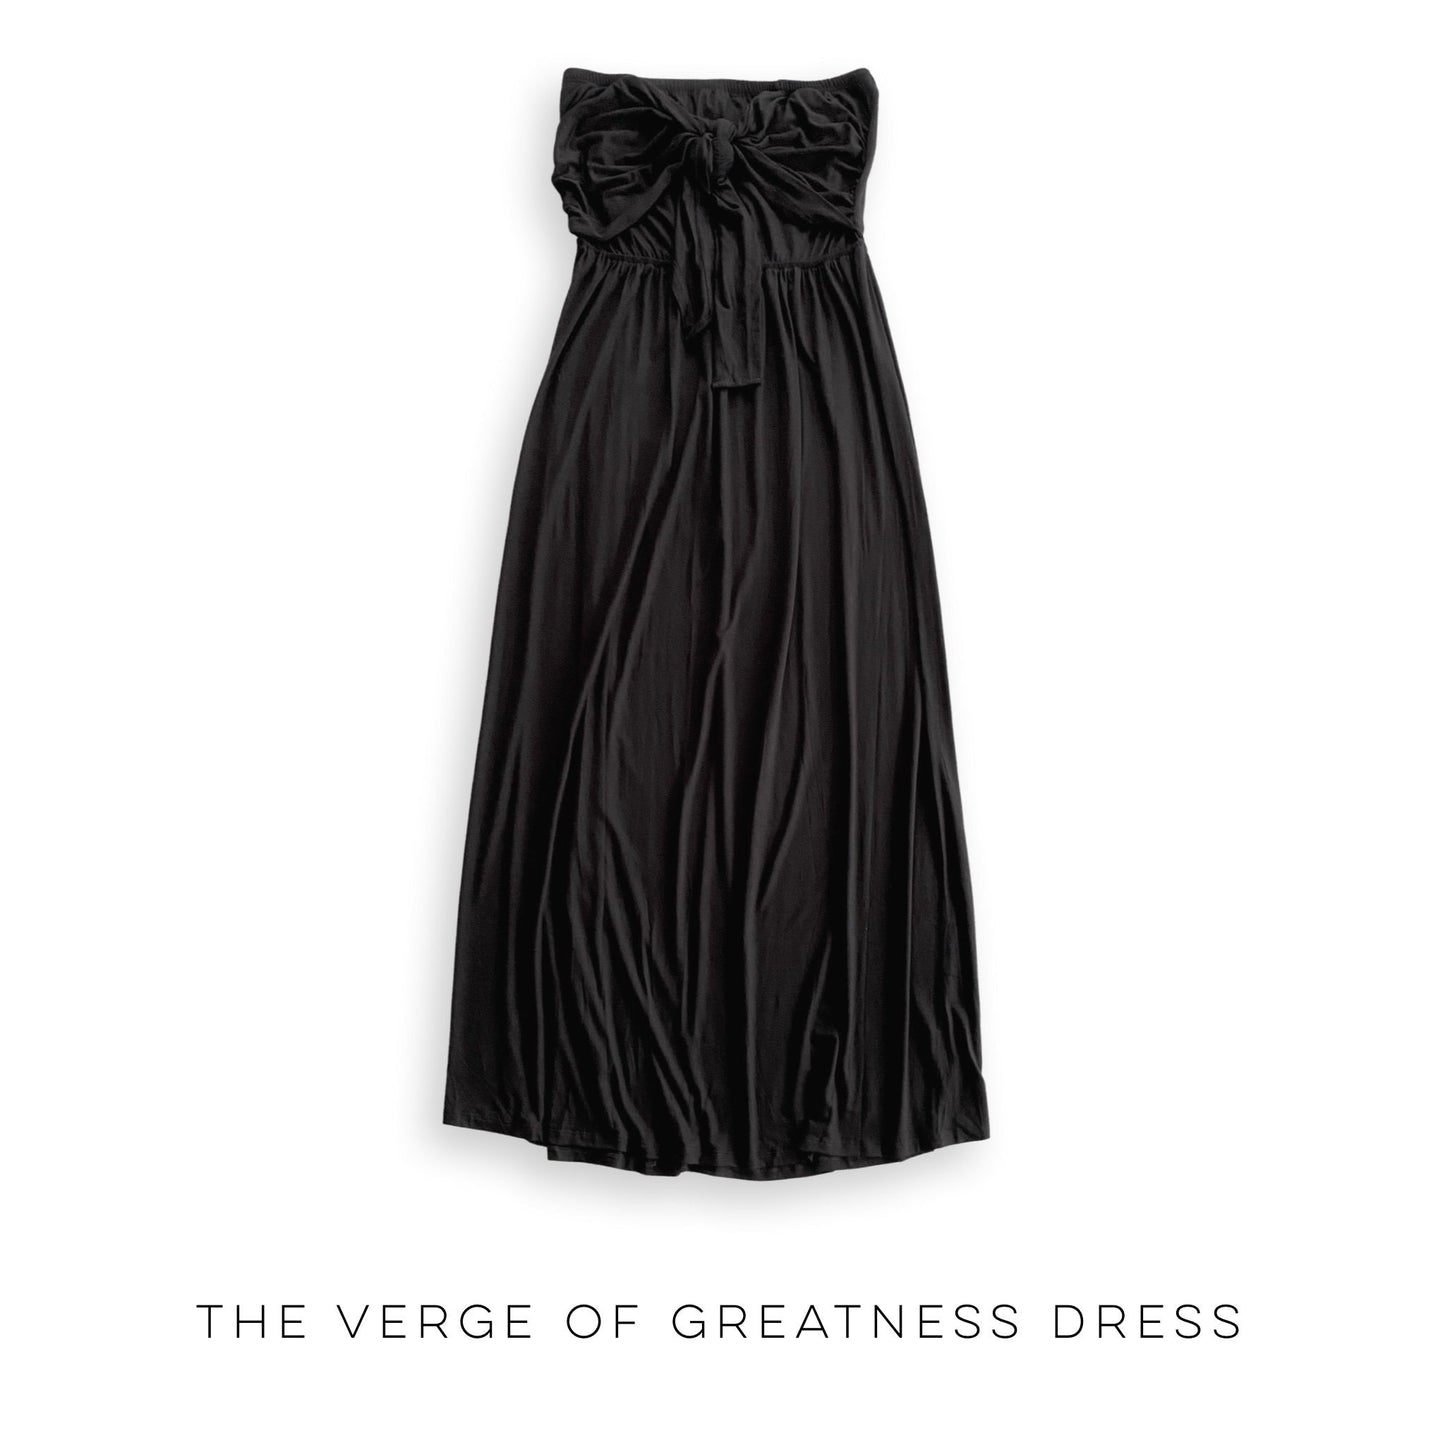 The Verge of Greatness Dress